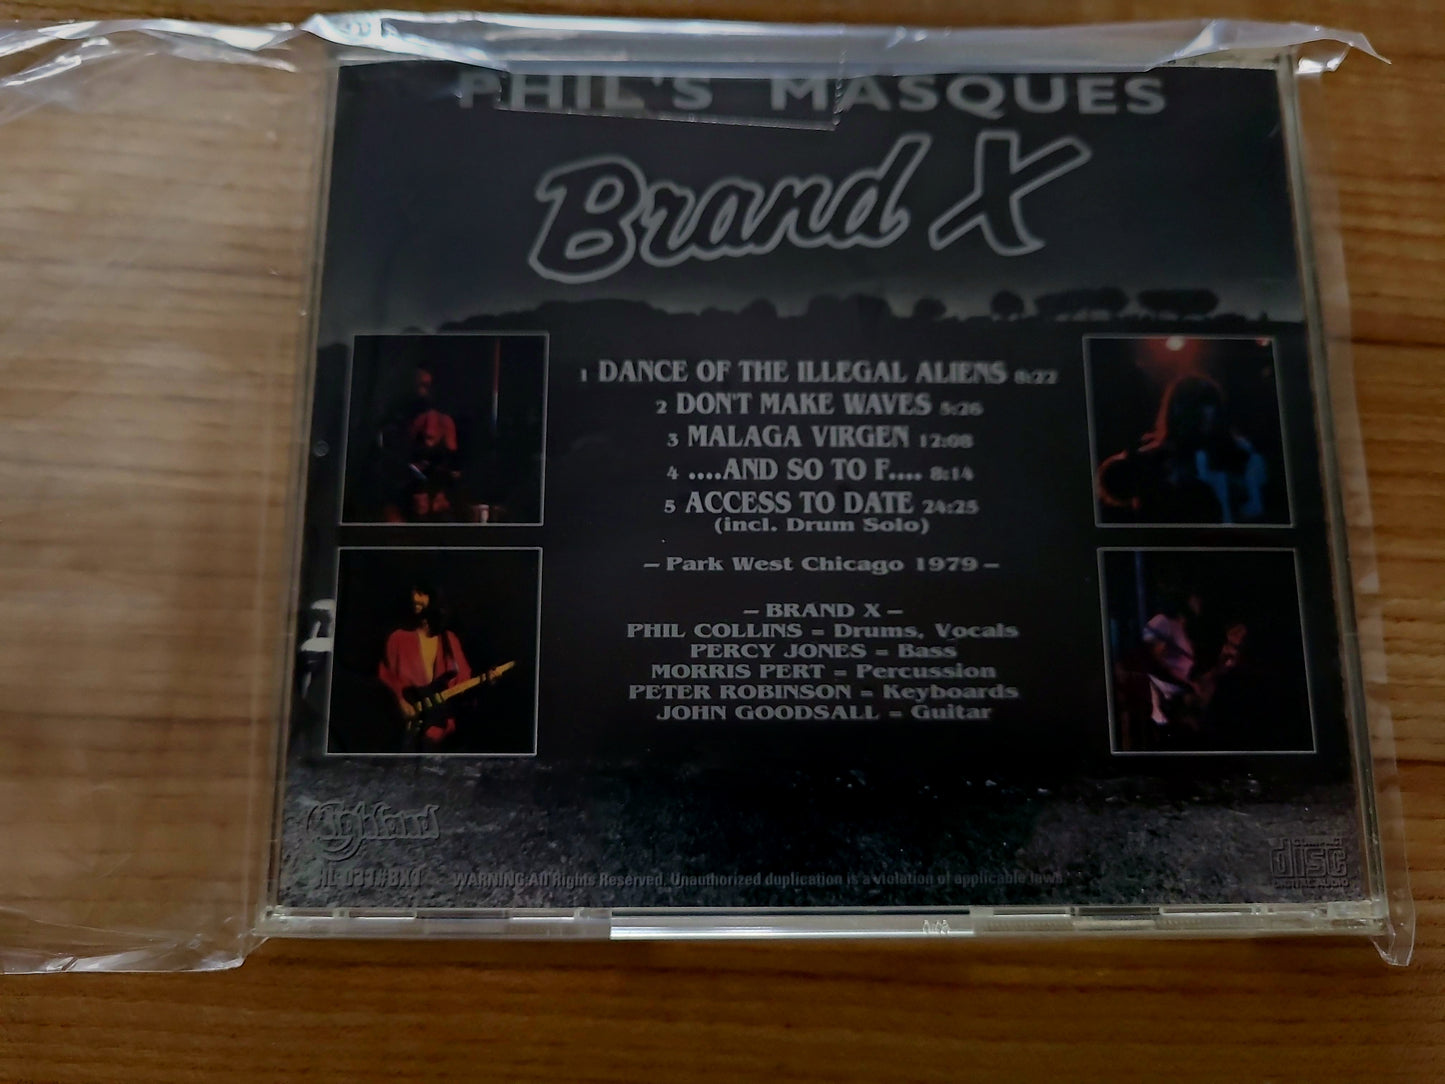 BRAND X - PHIL'S MASQUES - LIVE WEST CHICAGO 1979 - NEW CD - IMPORT